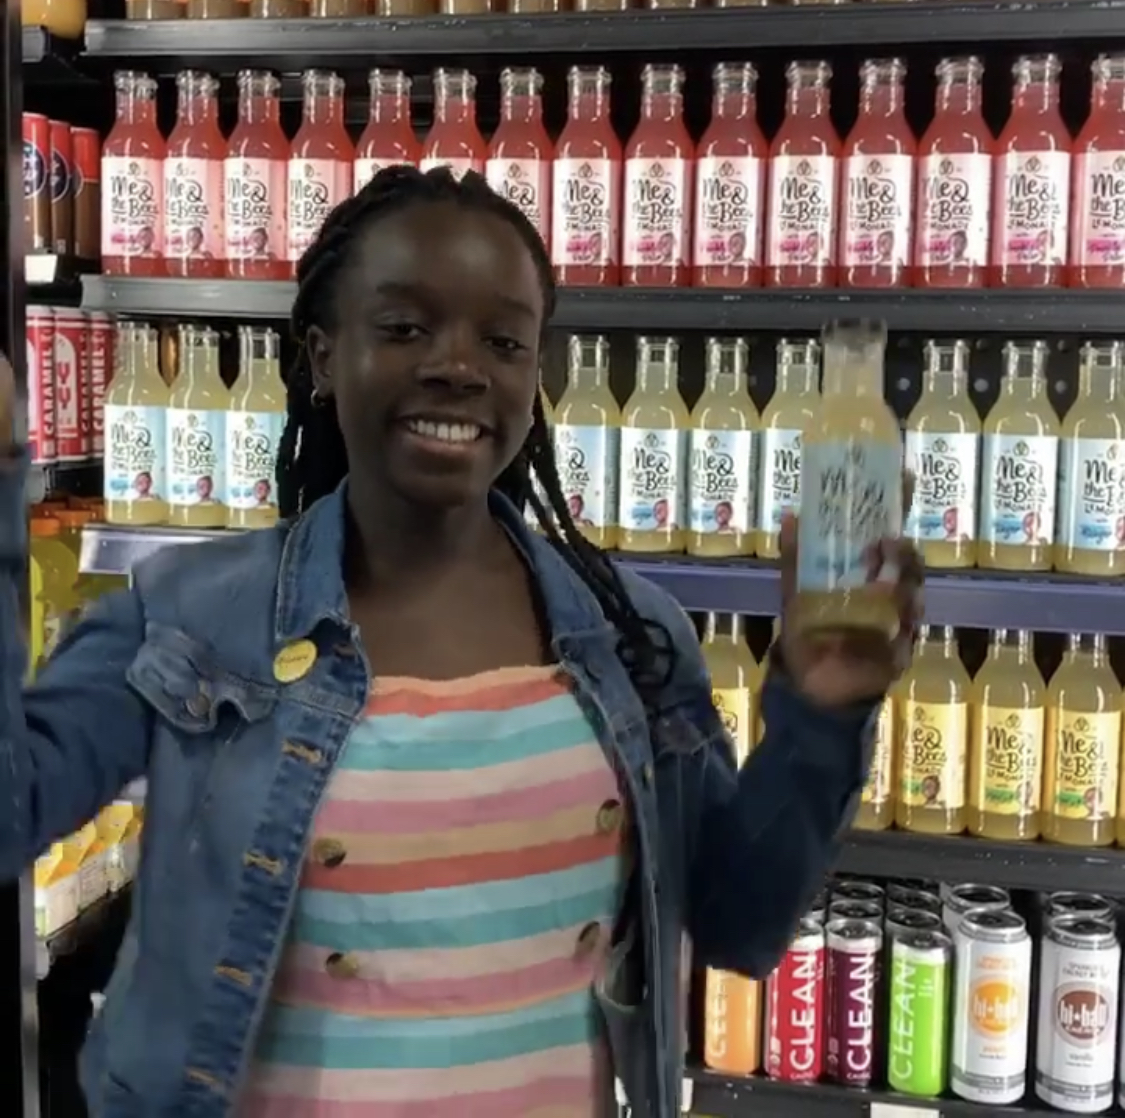 this photo shows Mikaila Ulmer with her Me & the Bees Lemonade bottles on supermarket shelves